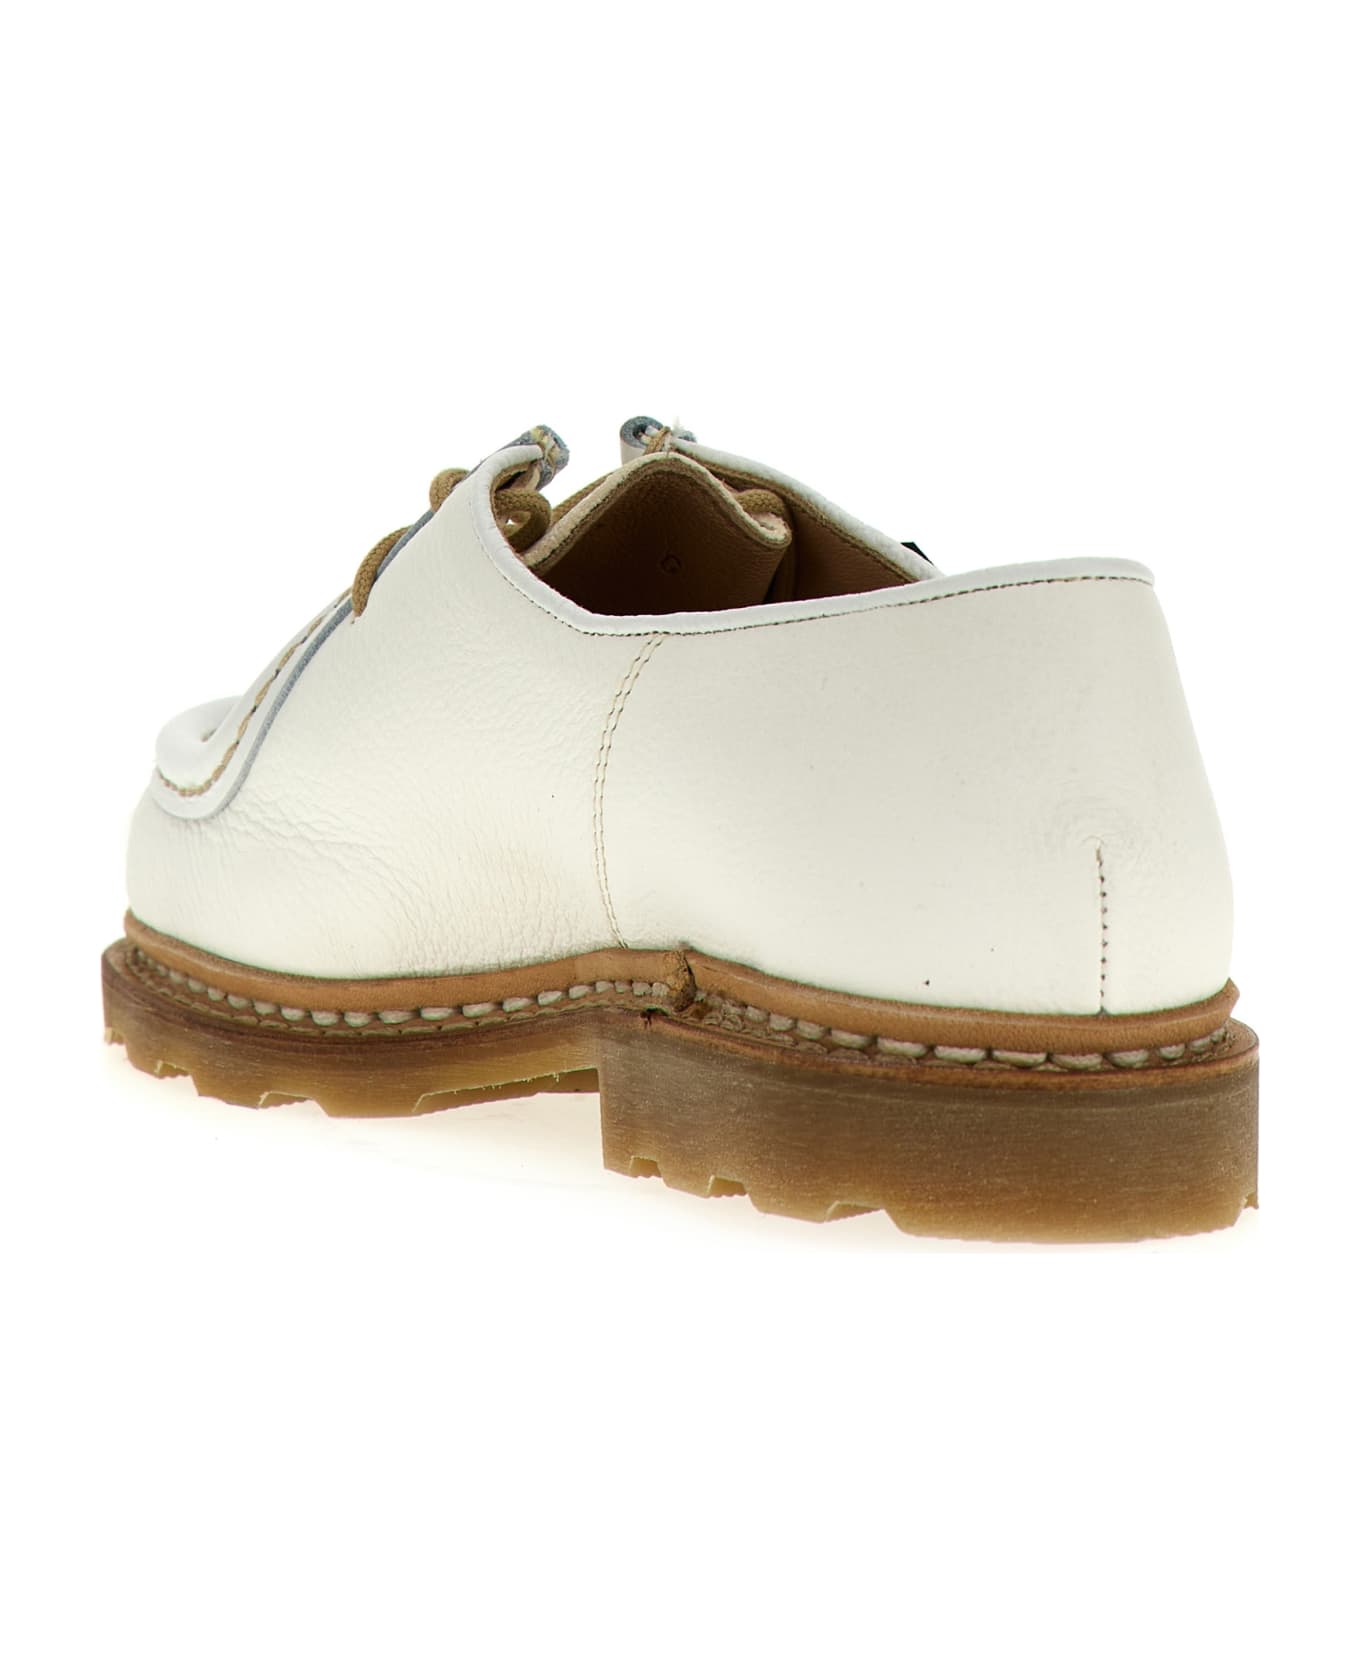 Paraboot 'michael' Derby Shoes - White